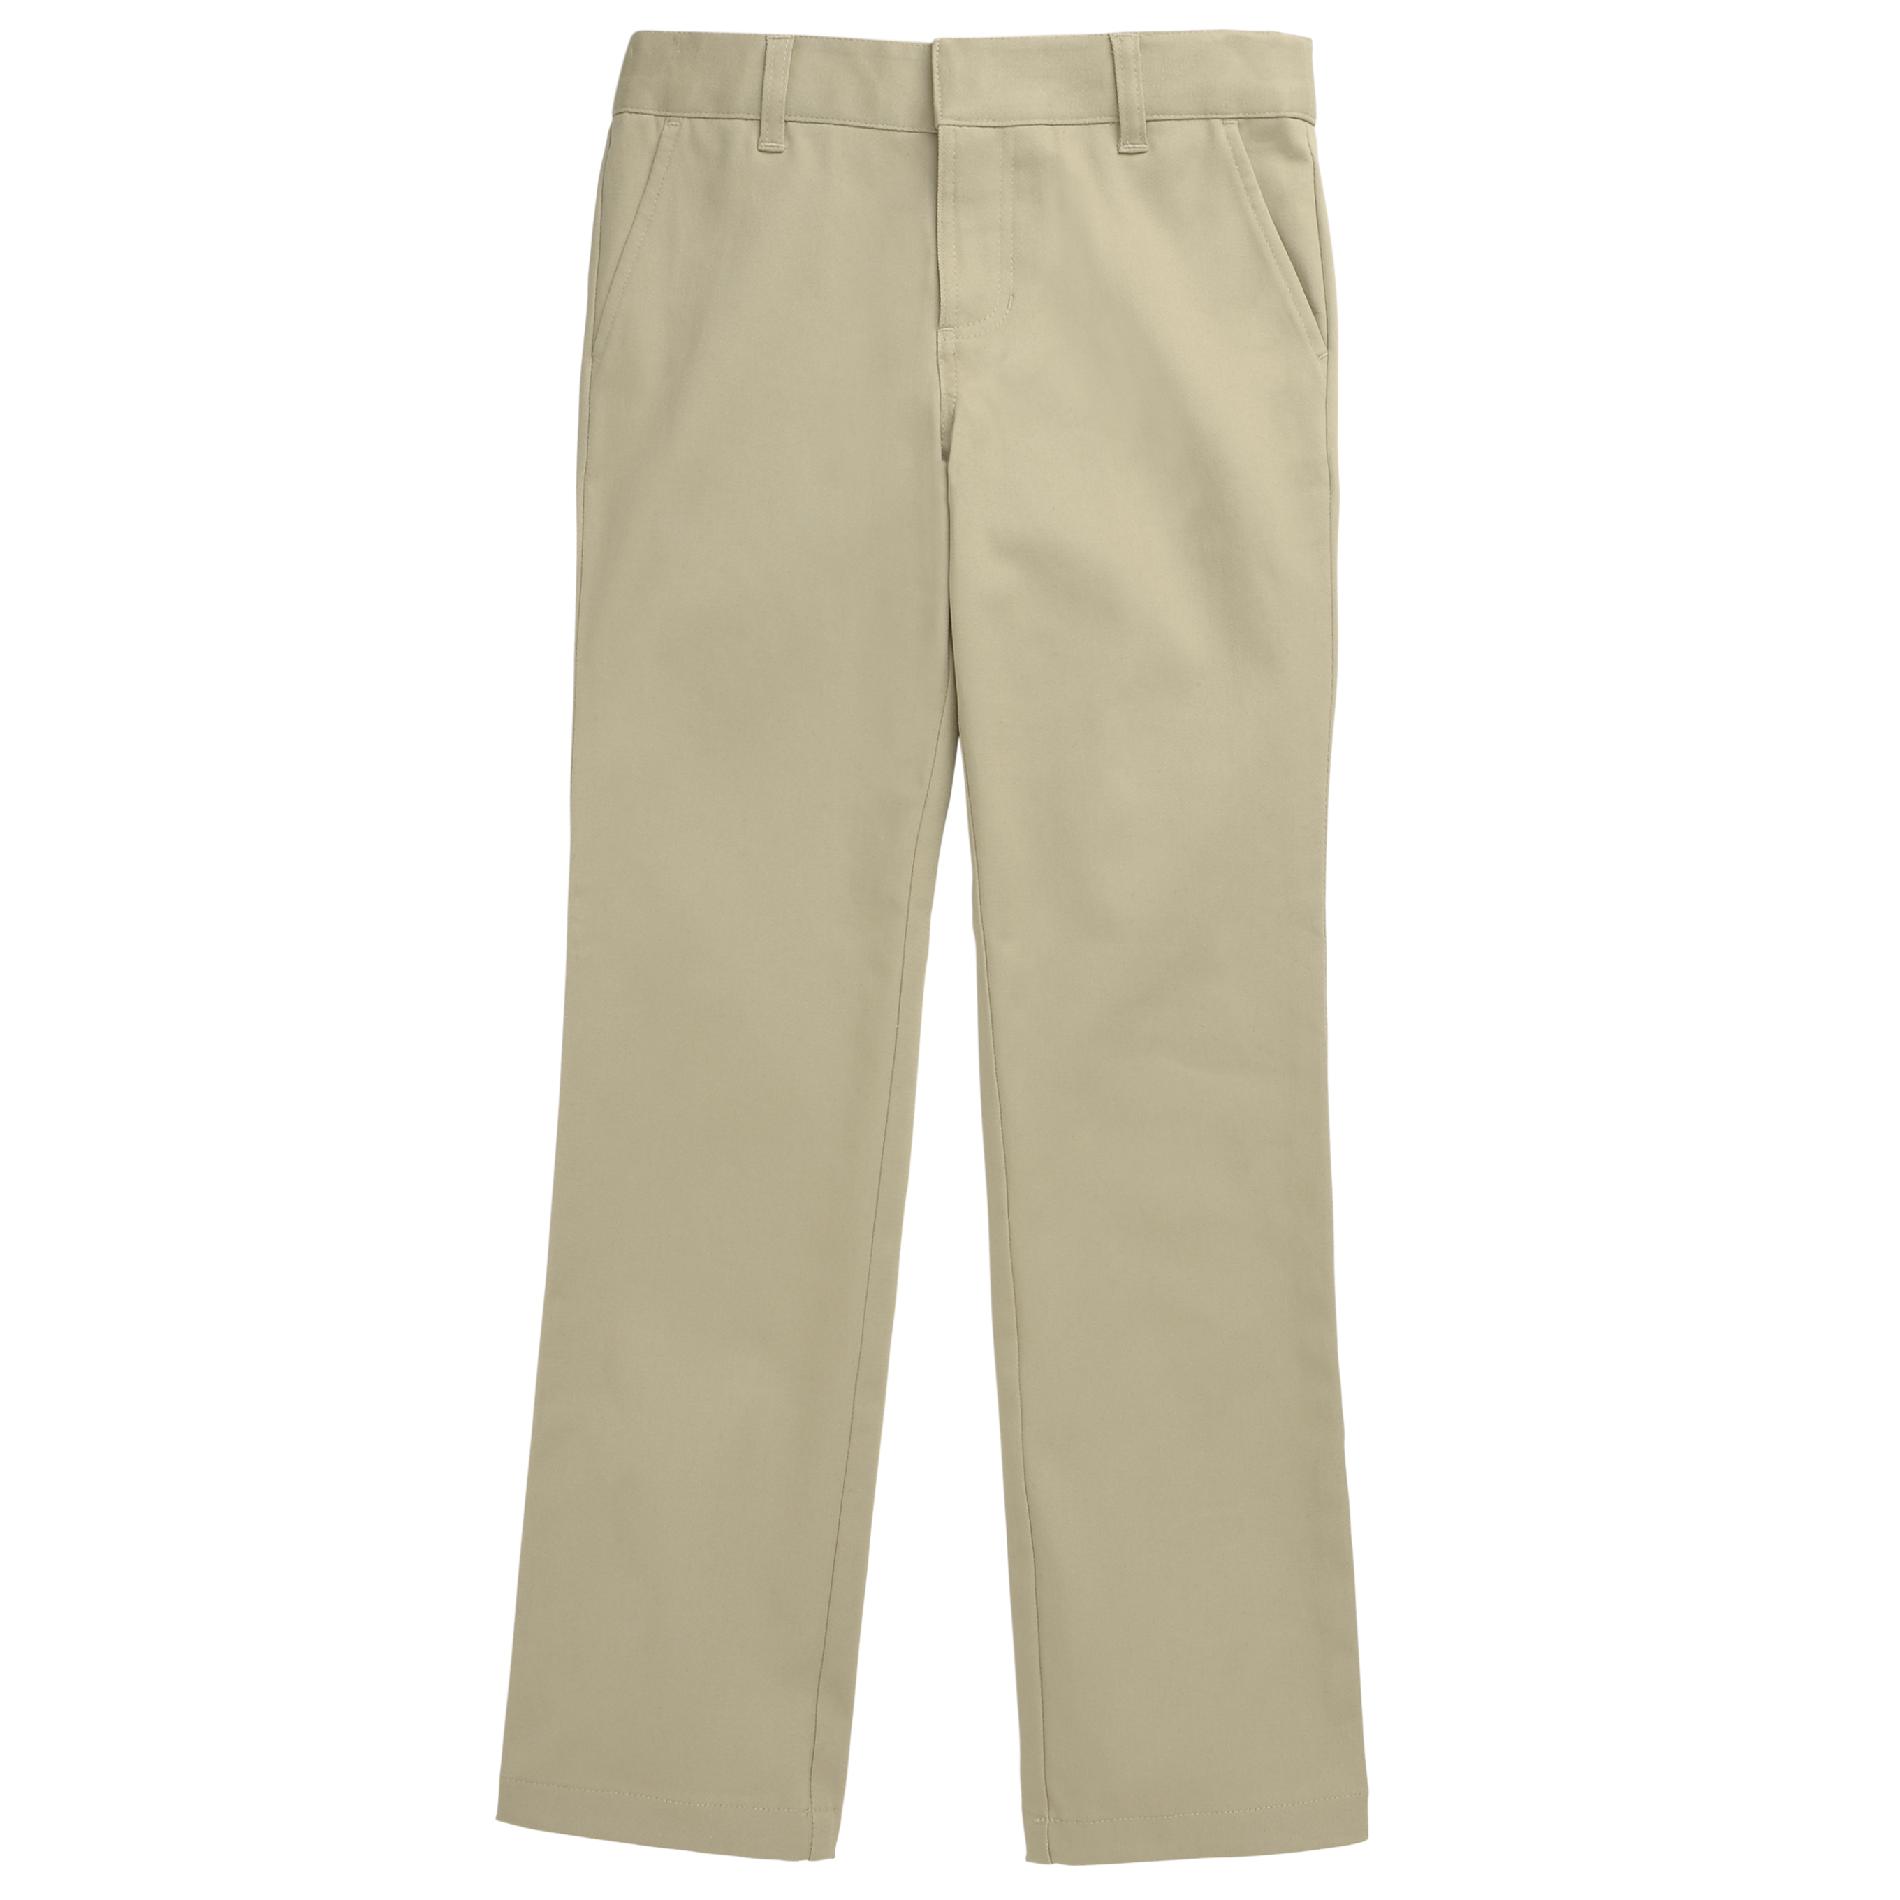 At School by French Toast Stretch Straight Leg Pant